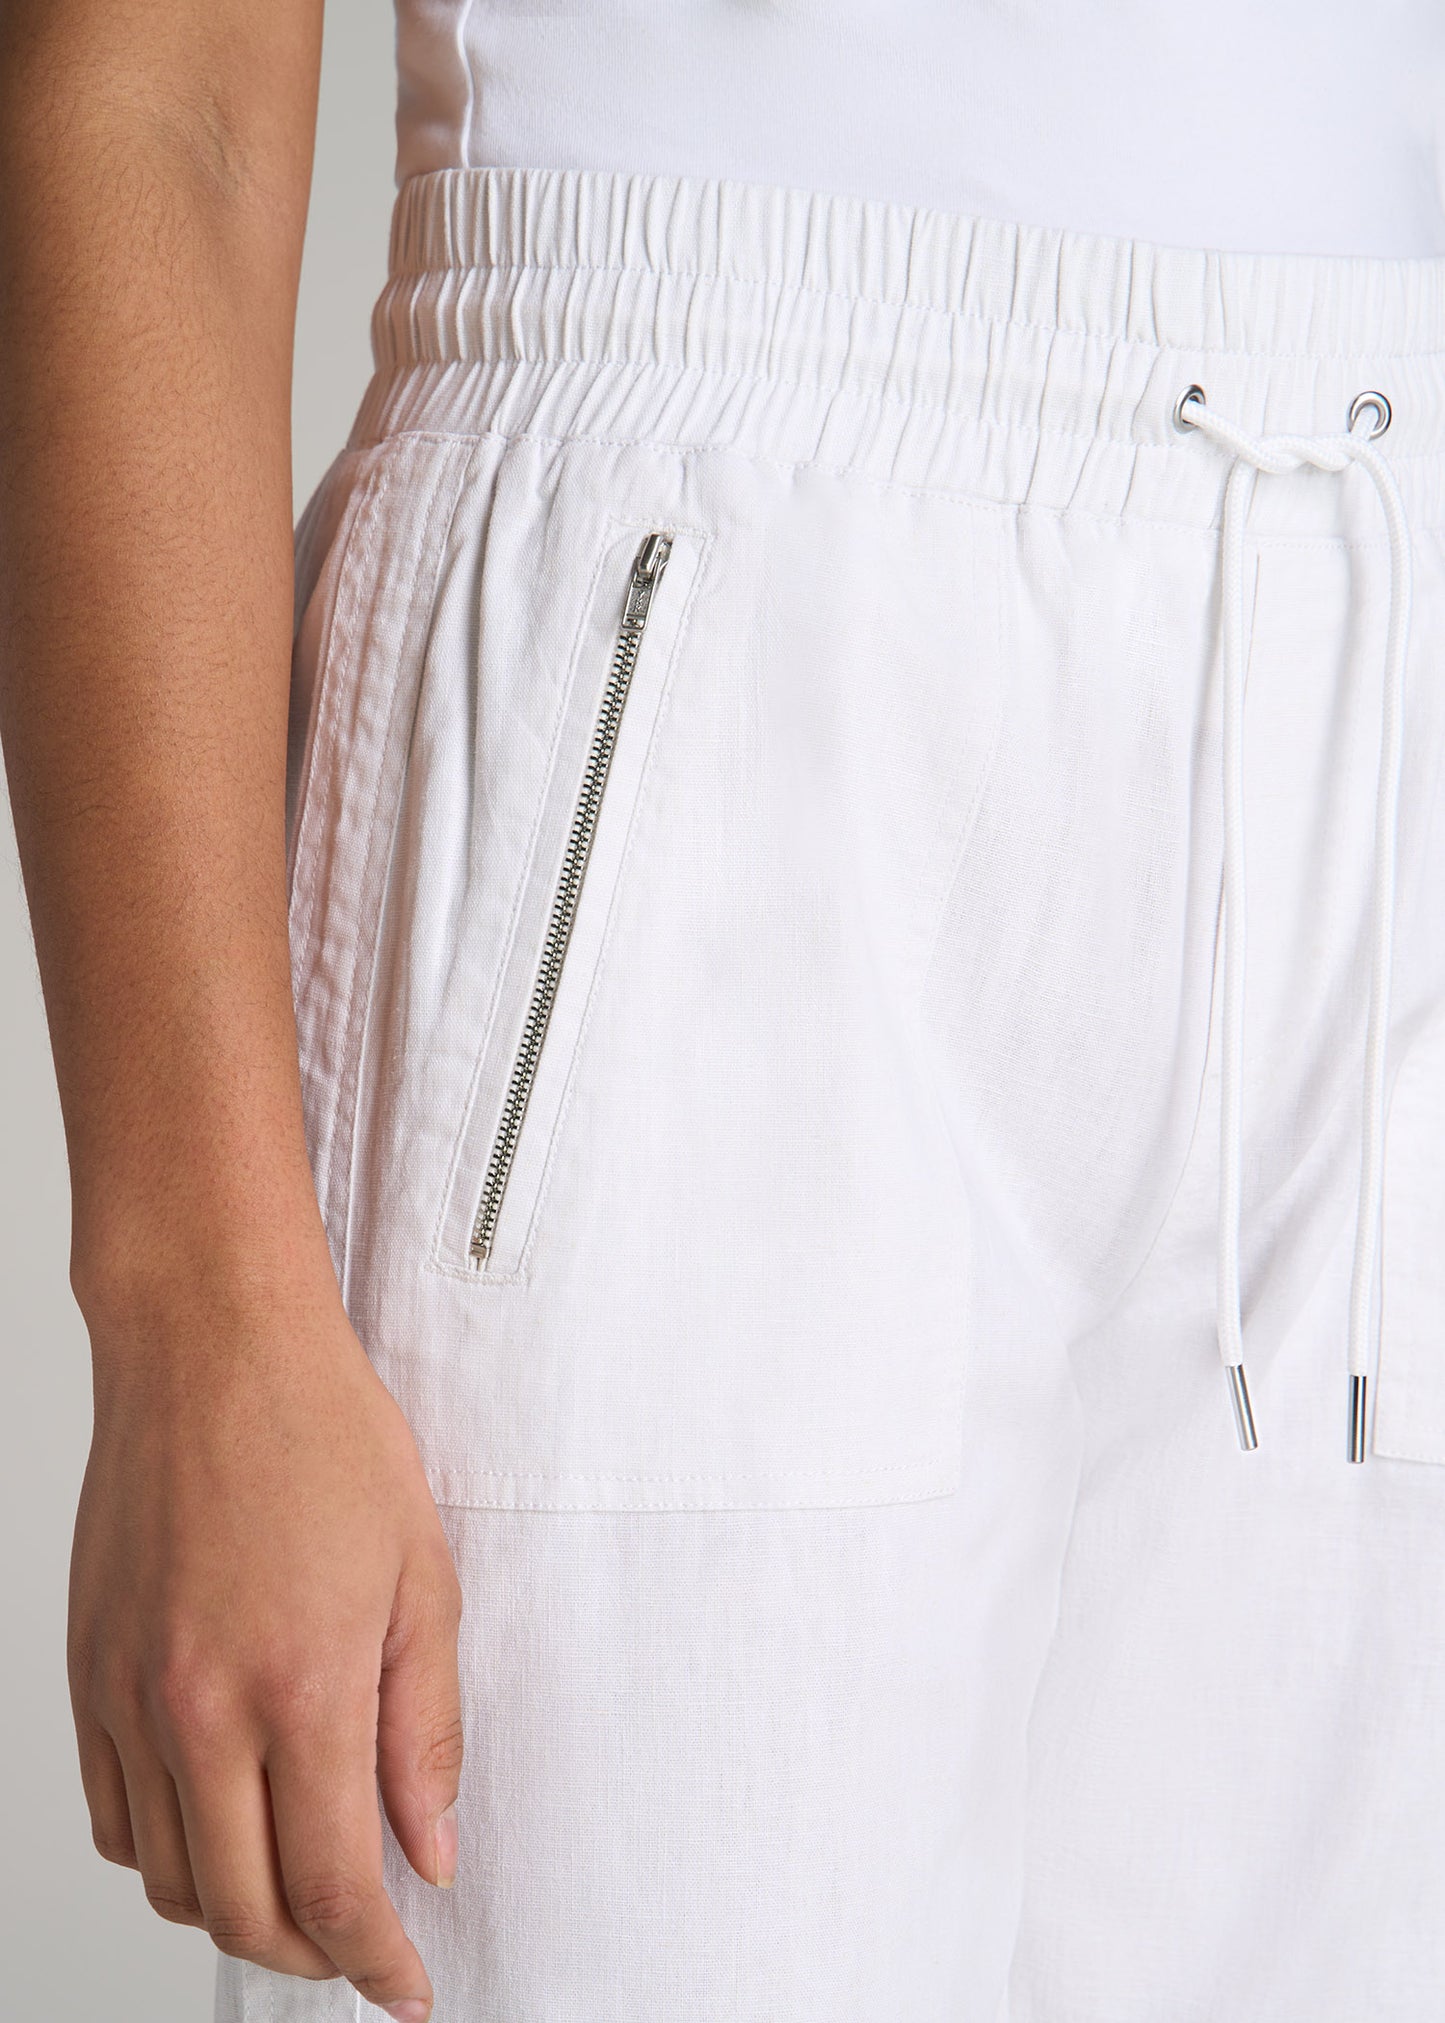 Pull-On Linen Joggers for Tall Women in White